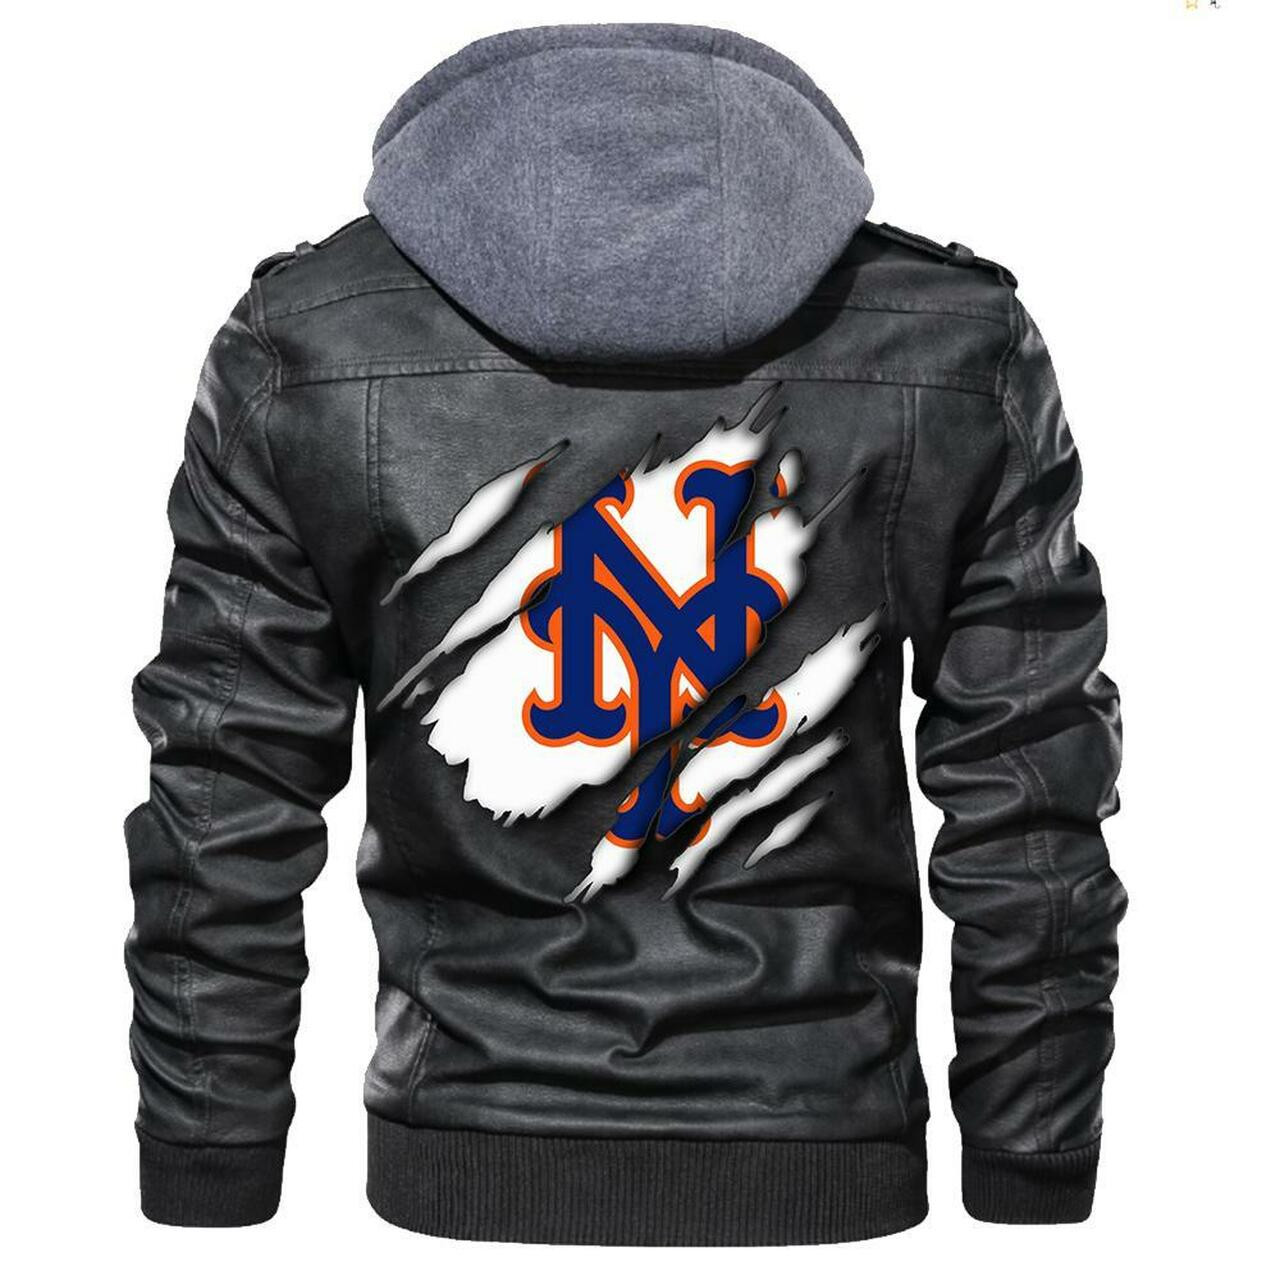 This leather Jacket will look great on you and make you stand out from the crowd 399